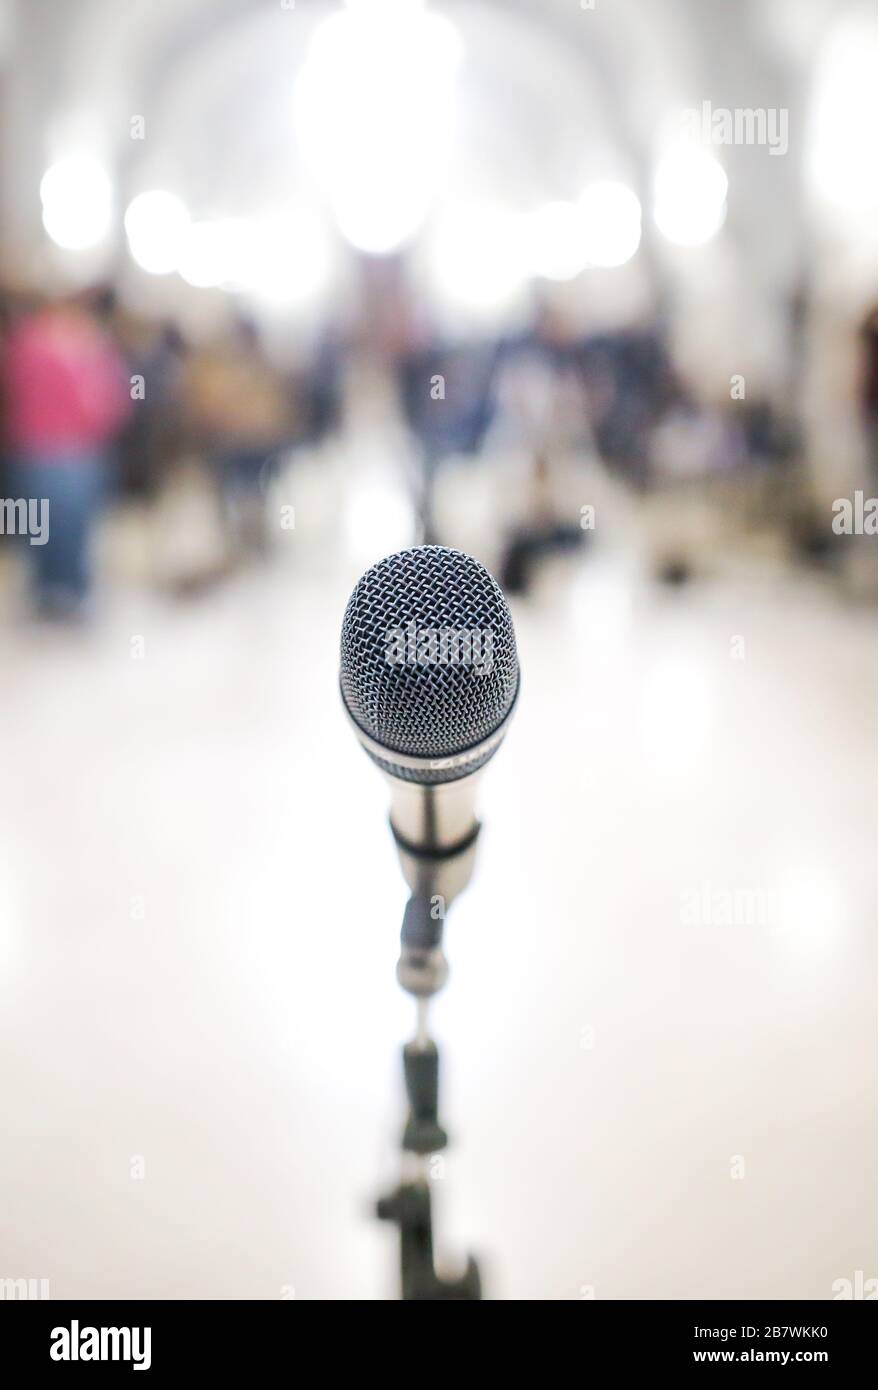 Shallow depth of field (selective focus) image with a microphone in front of TV cameras during a press conference. Stock Photo